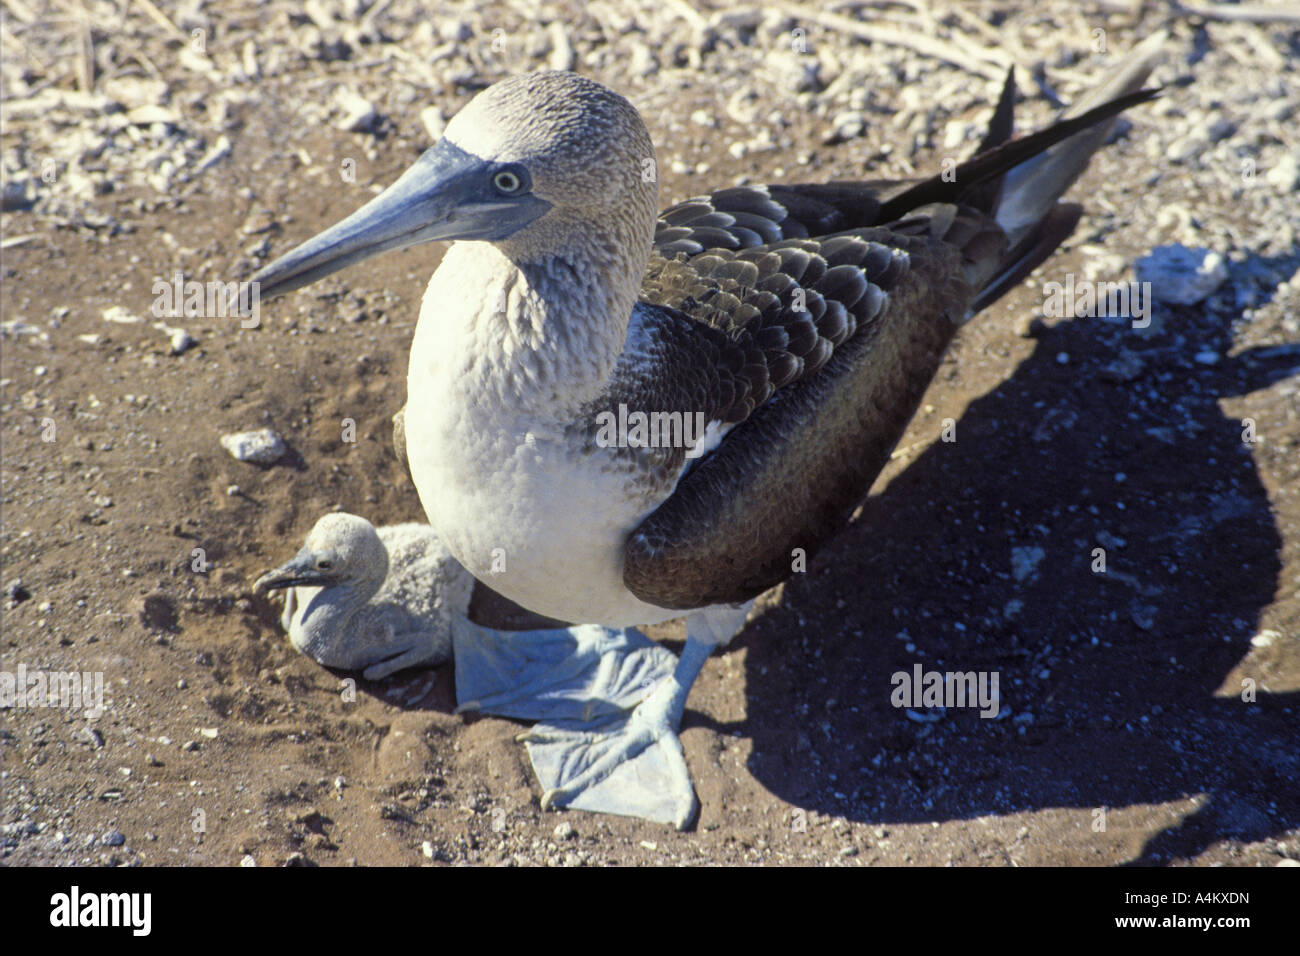 Blue footed booby and chick Espanola (Hood) island, Galapagos 0040 Stock Photo